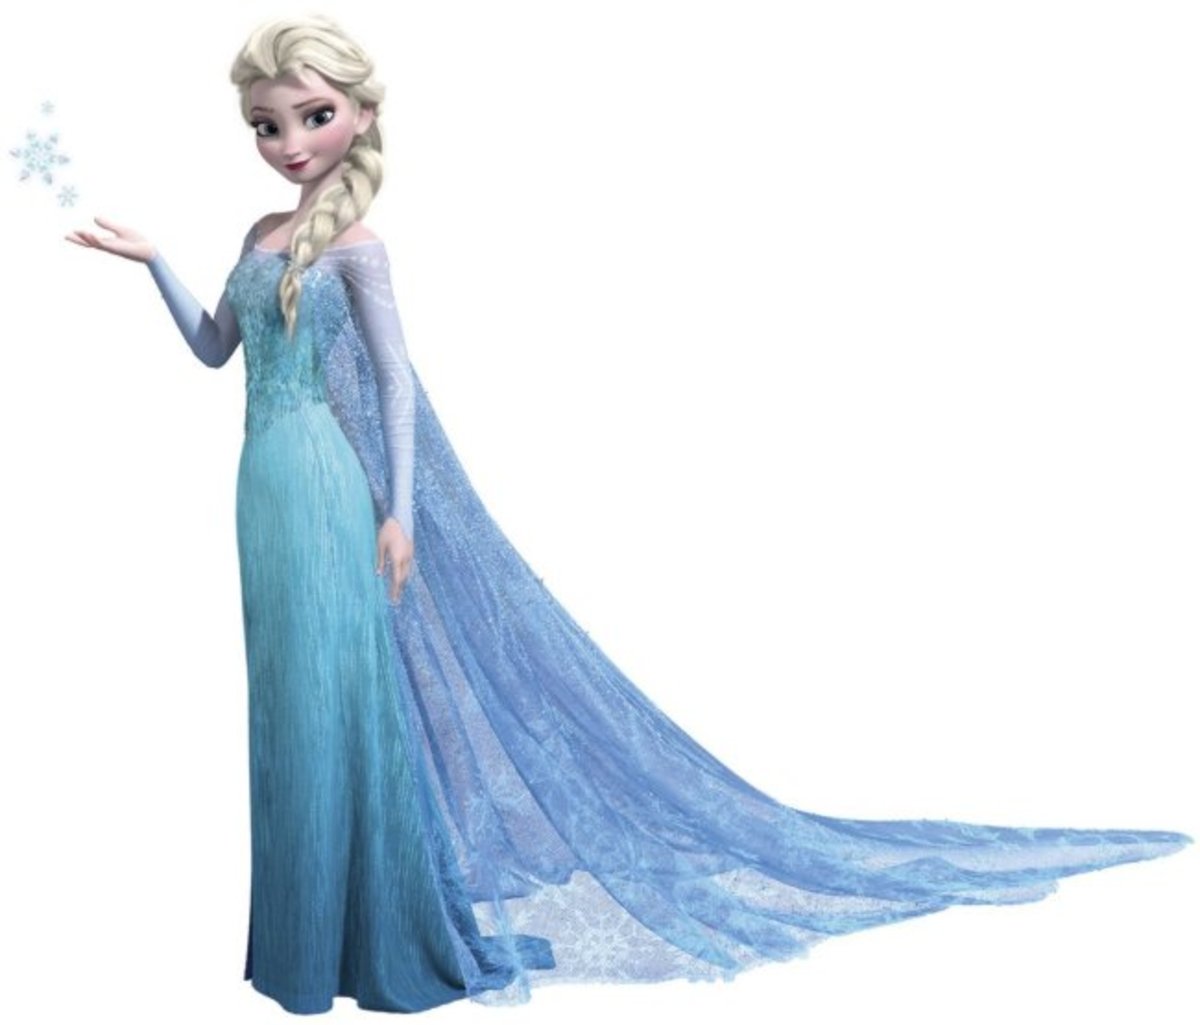 Elsa Decal available on Amazon